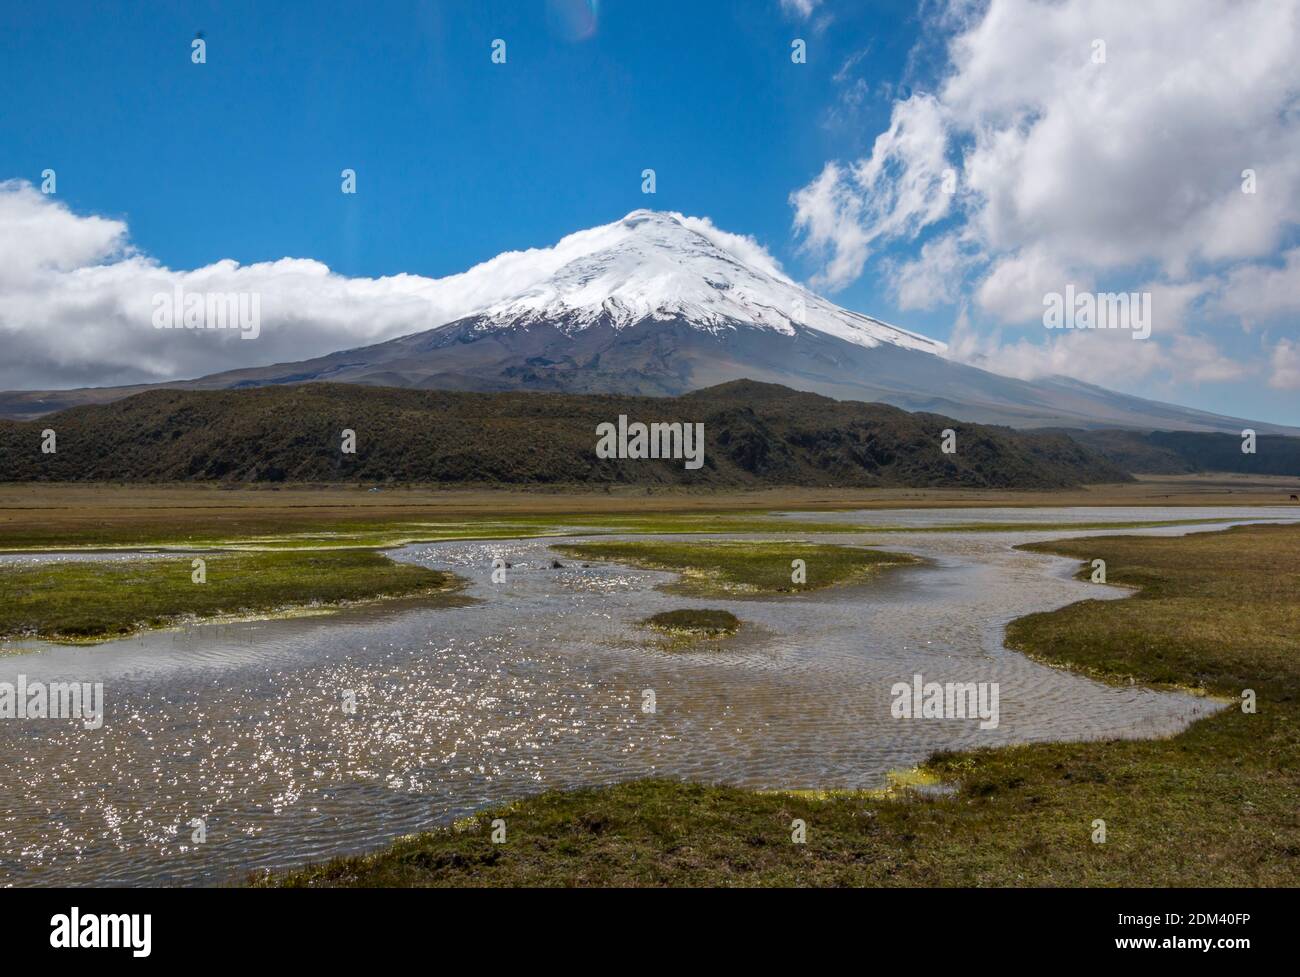 The snowcapped Cotopaxi Volcano with a lake  (Laguna Limpiopungo) in foreground. Cotopaxi National Park in the Ecuadorian Andes. Stock Photo